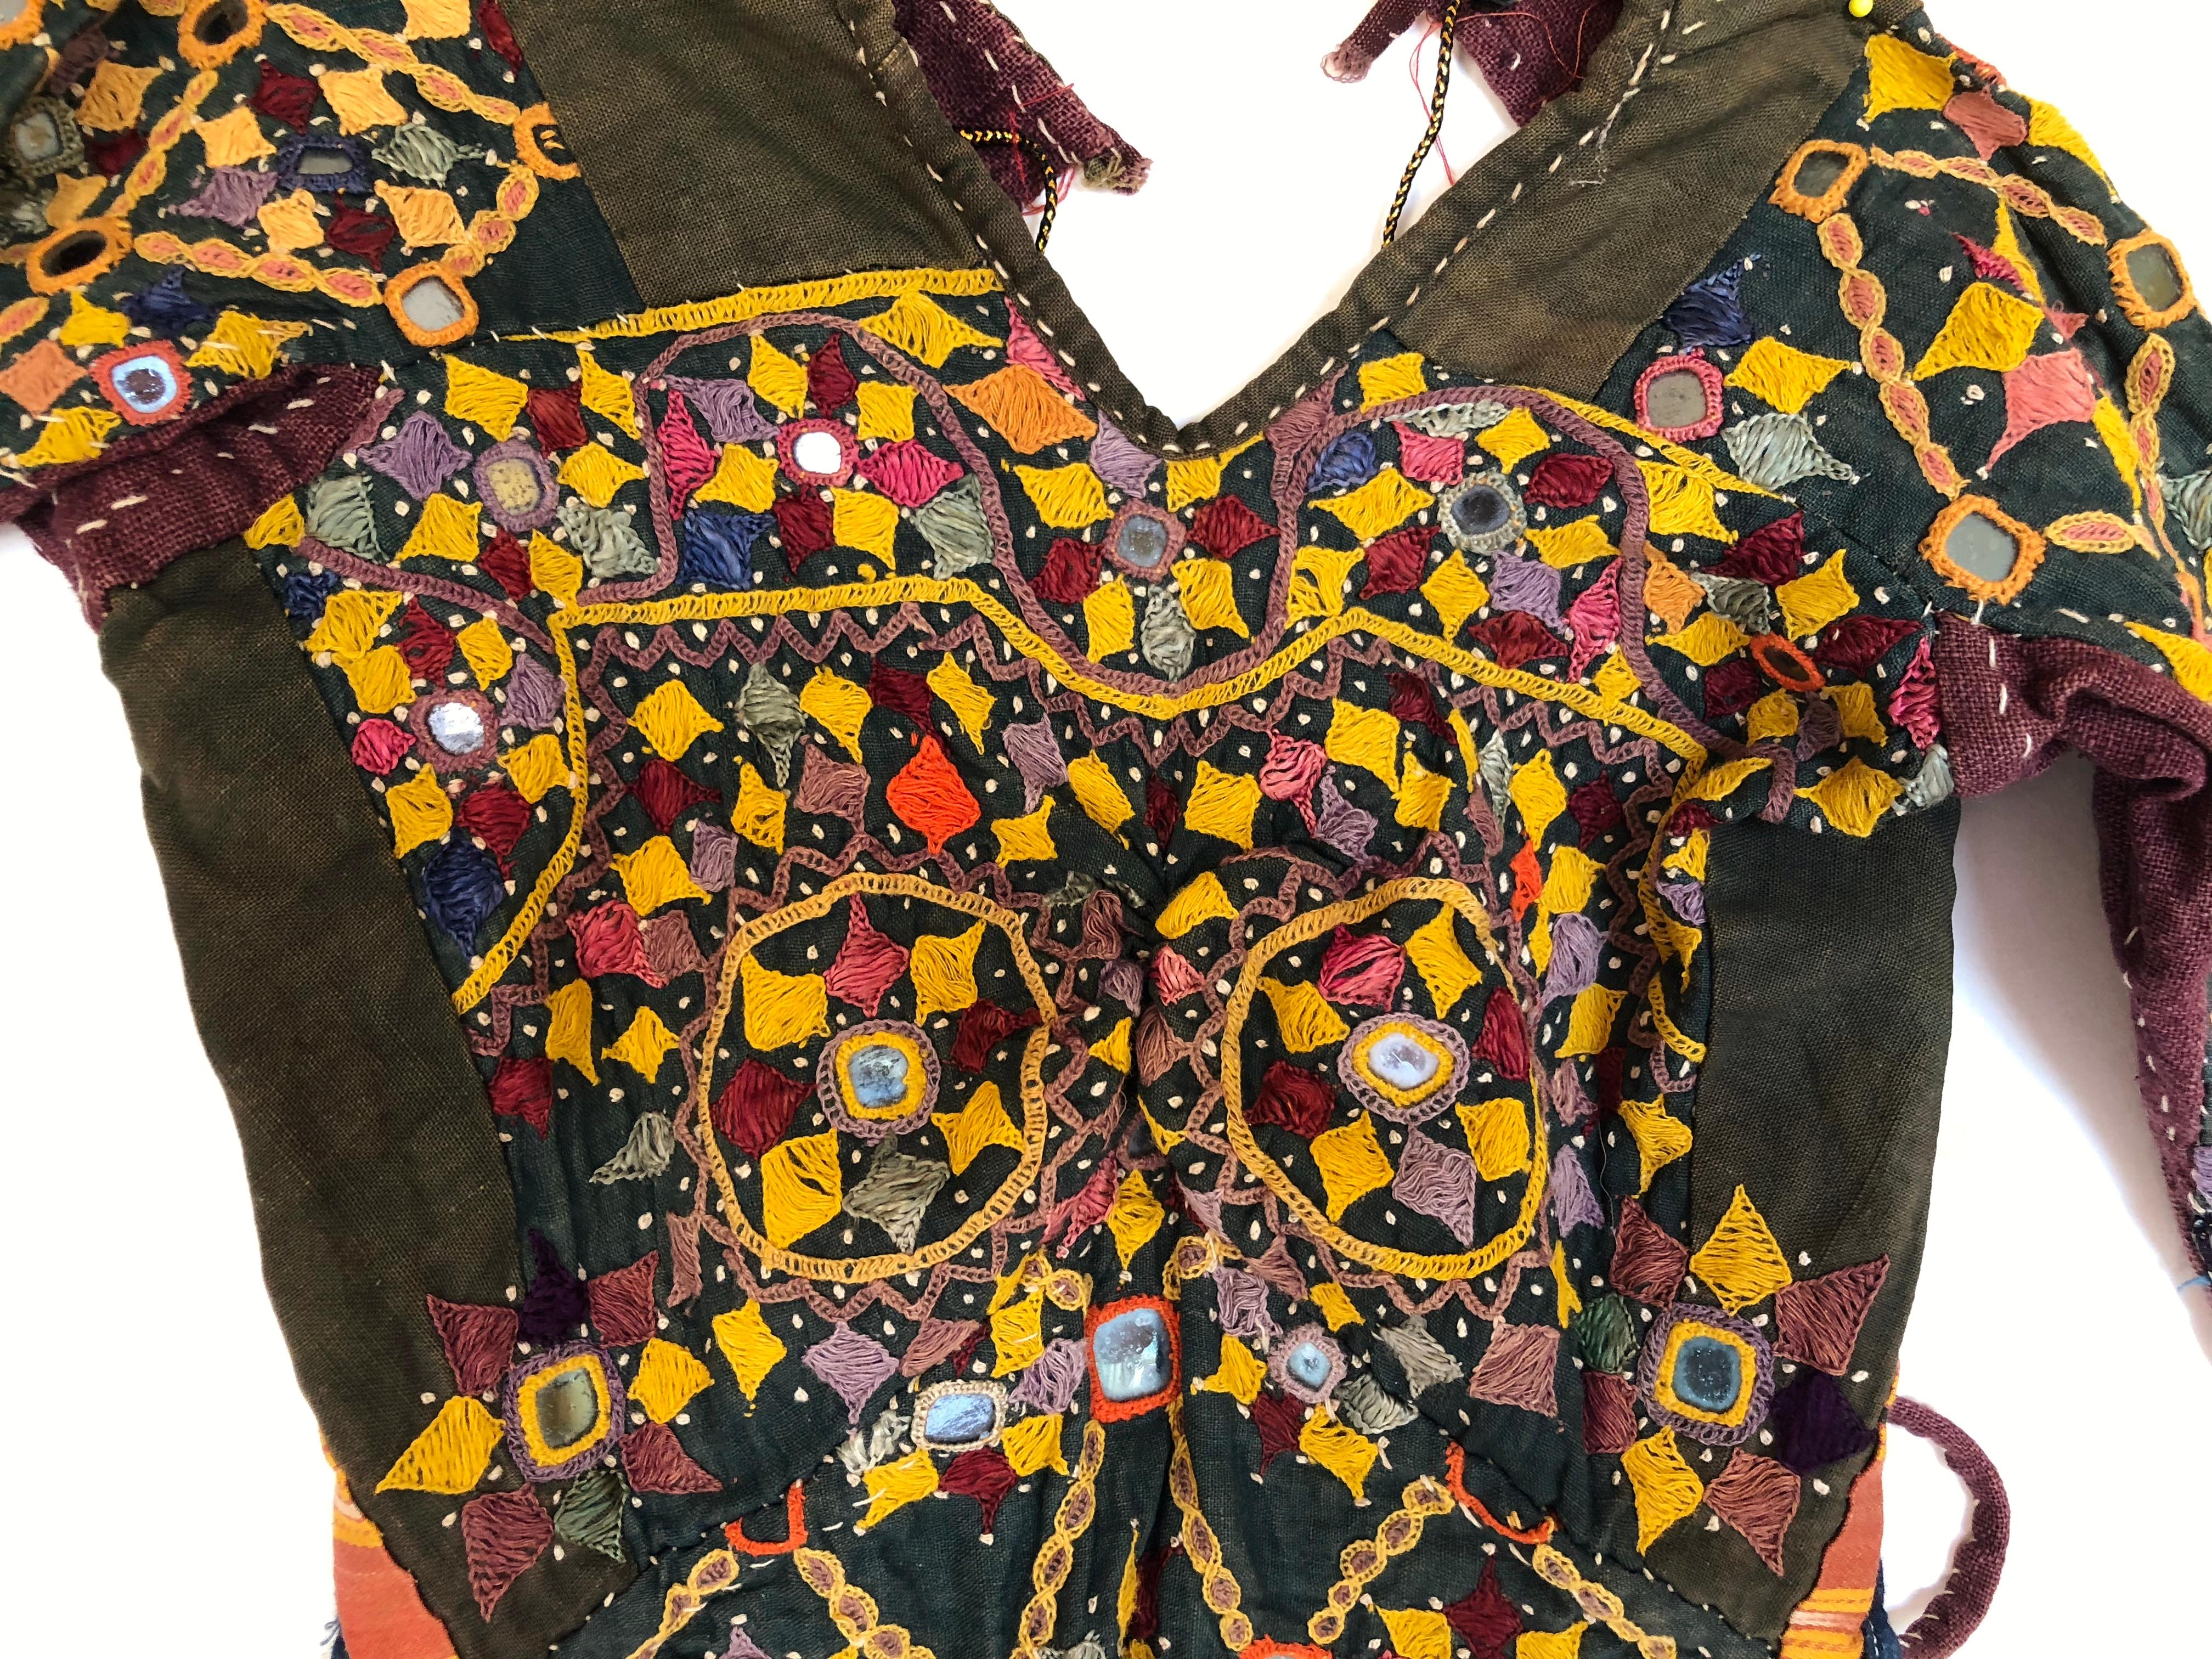 Rare vintage Kutch tribal Choli or blouse from India. The garment is made from handwoven cotton with heavy embroidery and mirrors. It is a woman's garment but very small in size with an open back and string ties. Photos show stitching on reverse of